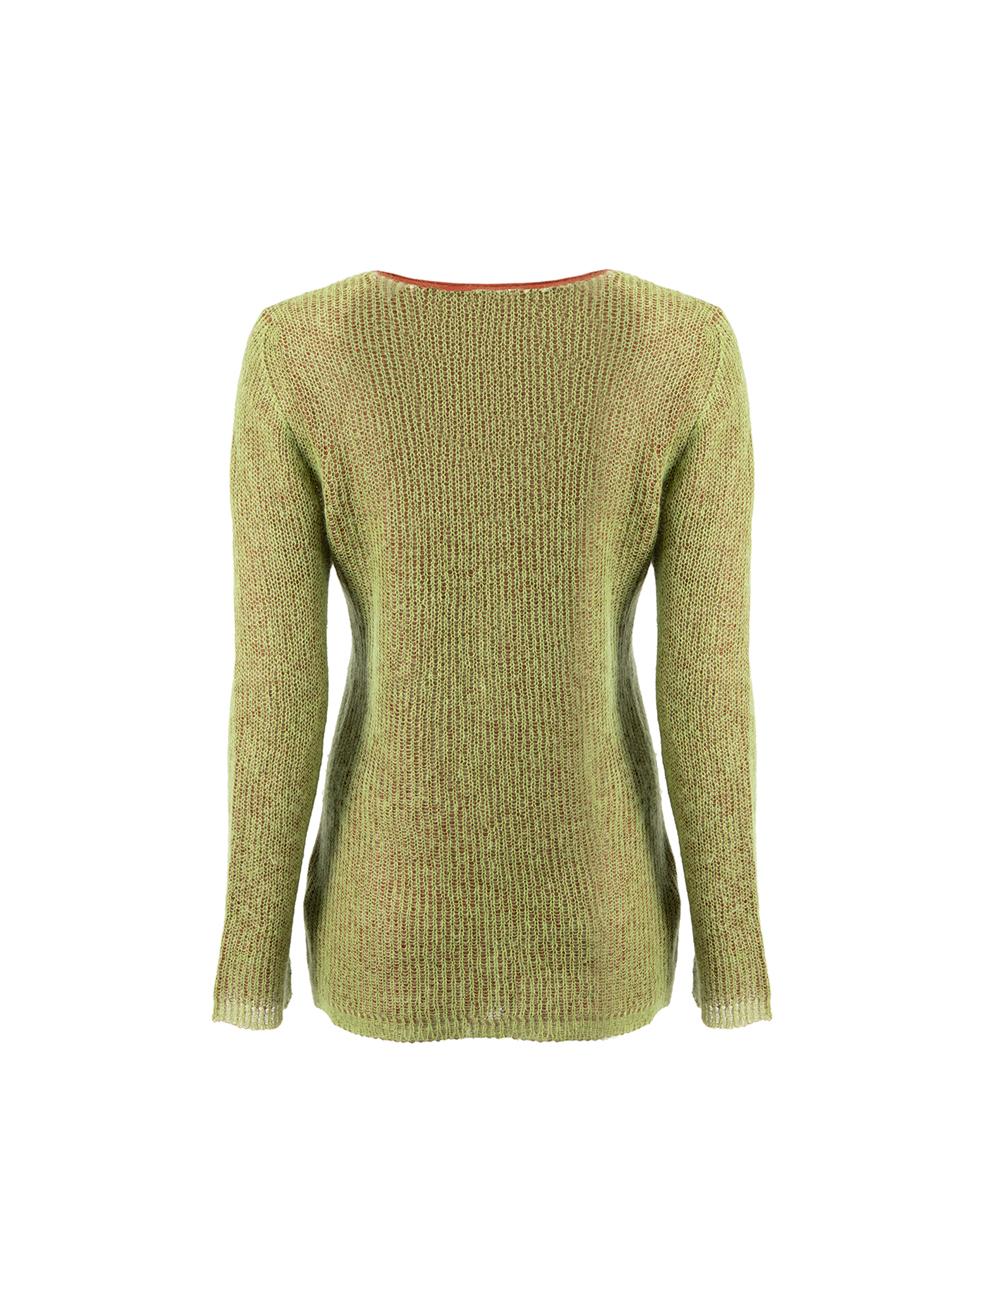 Green Mohair Layered Knit Jumper Size S In Good Condition For Sale In London, GB